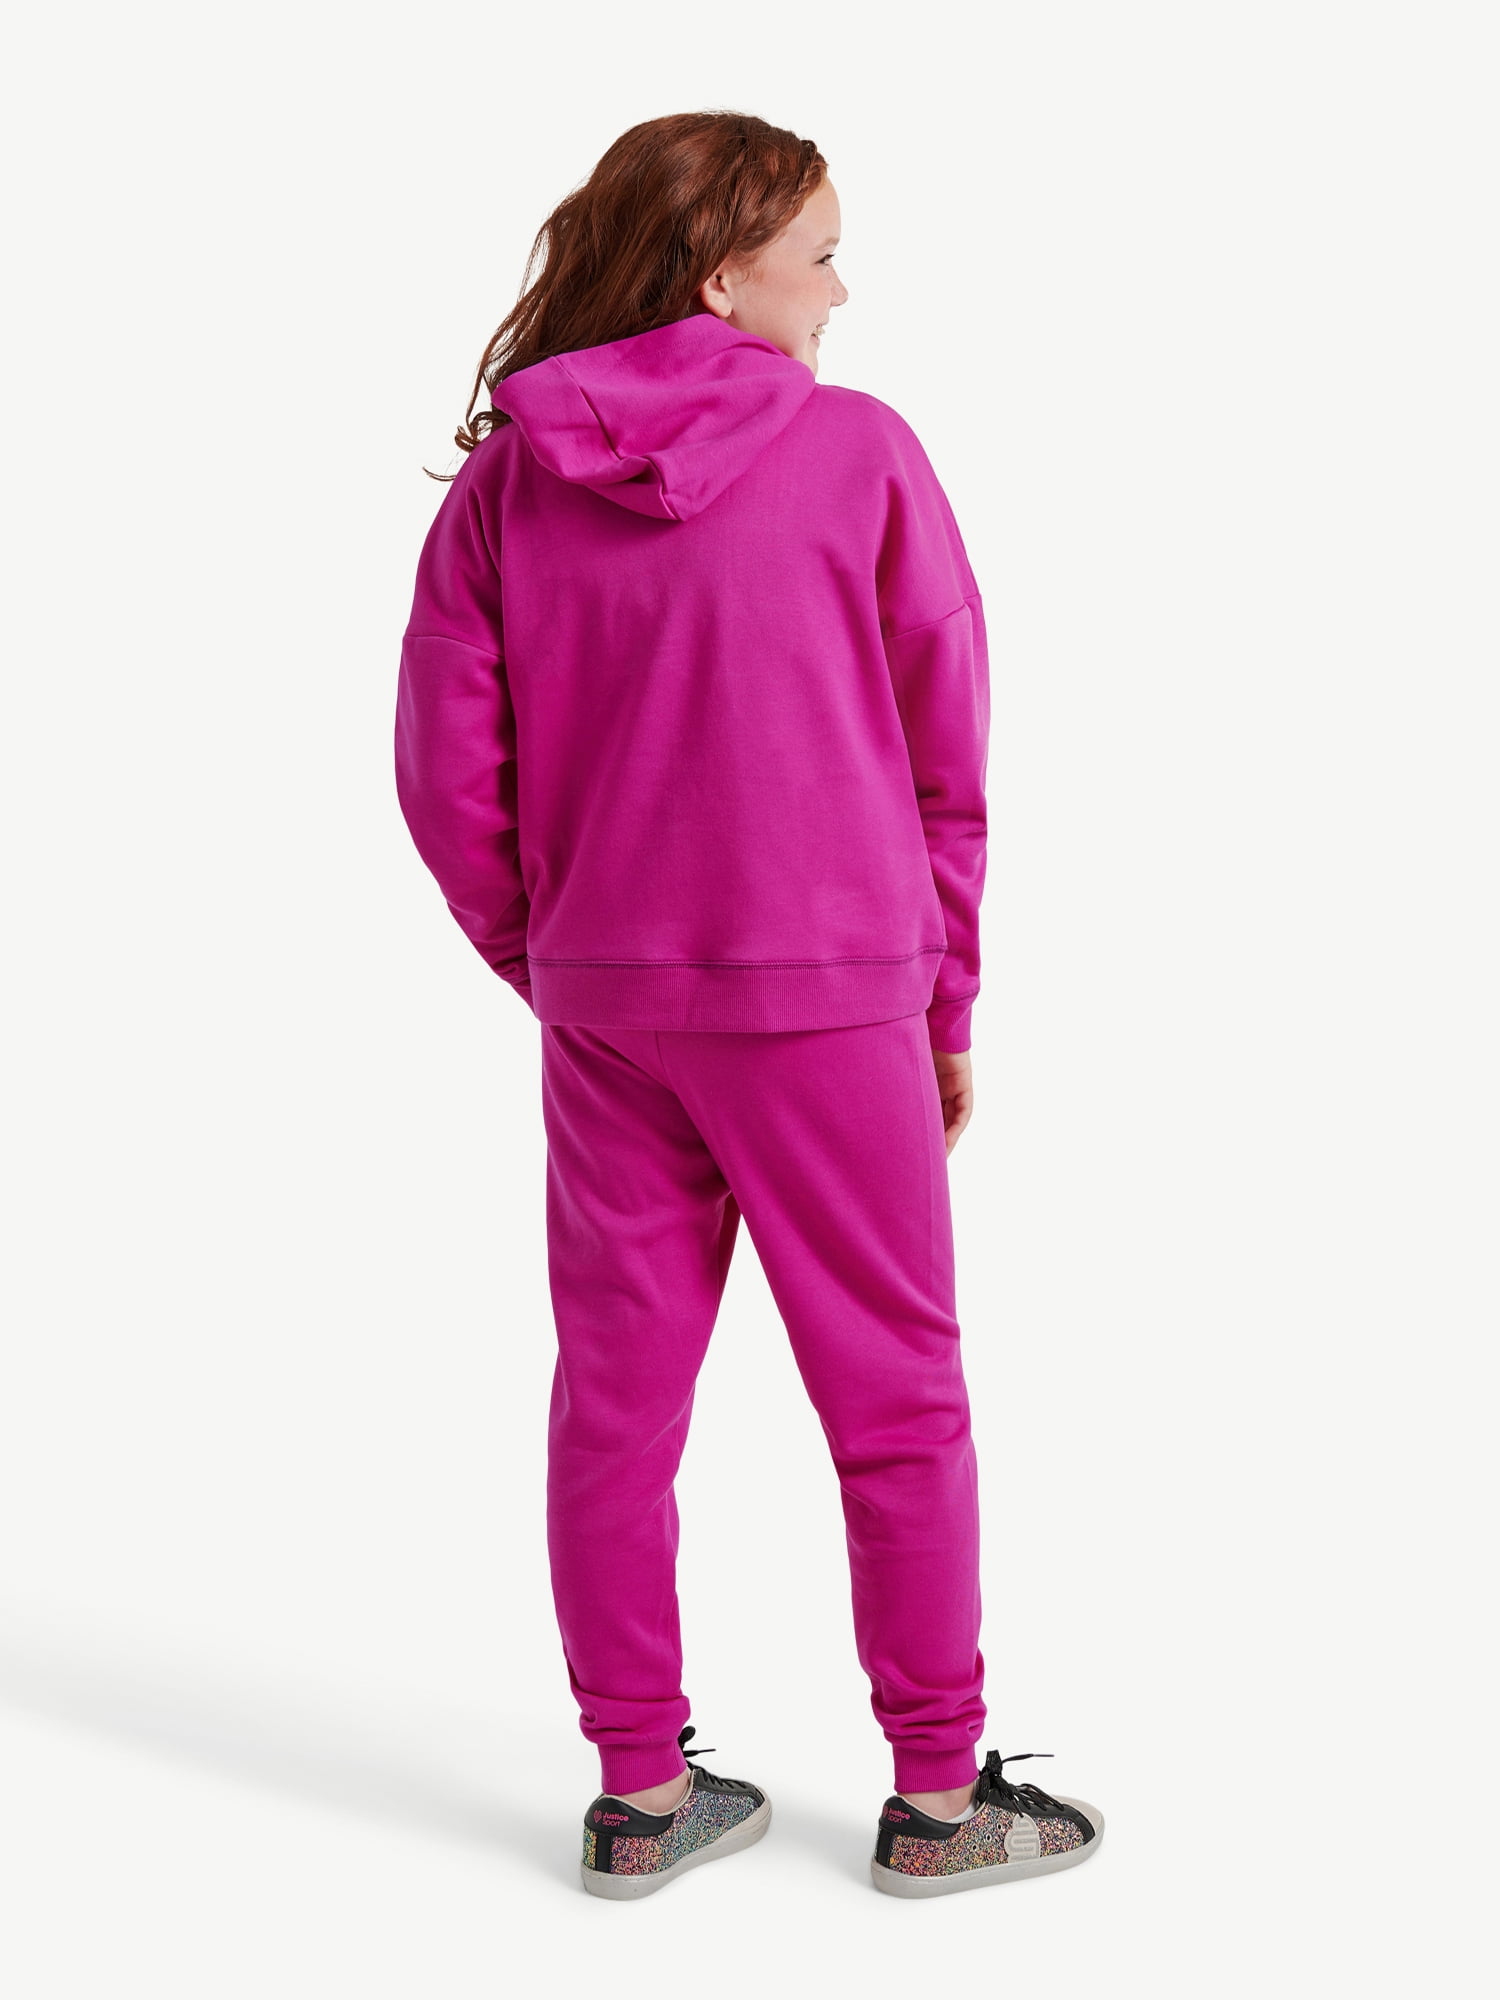 Justice Girls Dream Big Hooded Shirt & Sweatpants Outfit Size 8/10